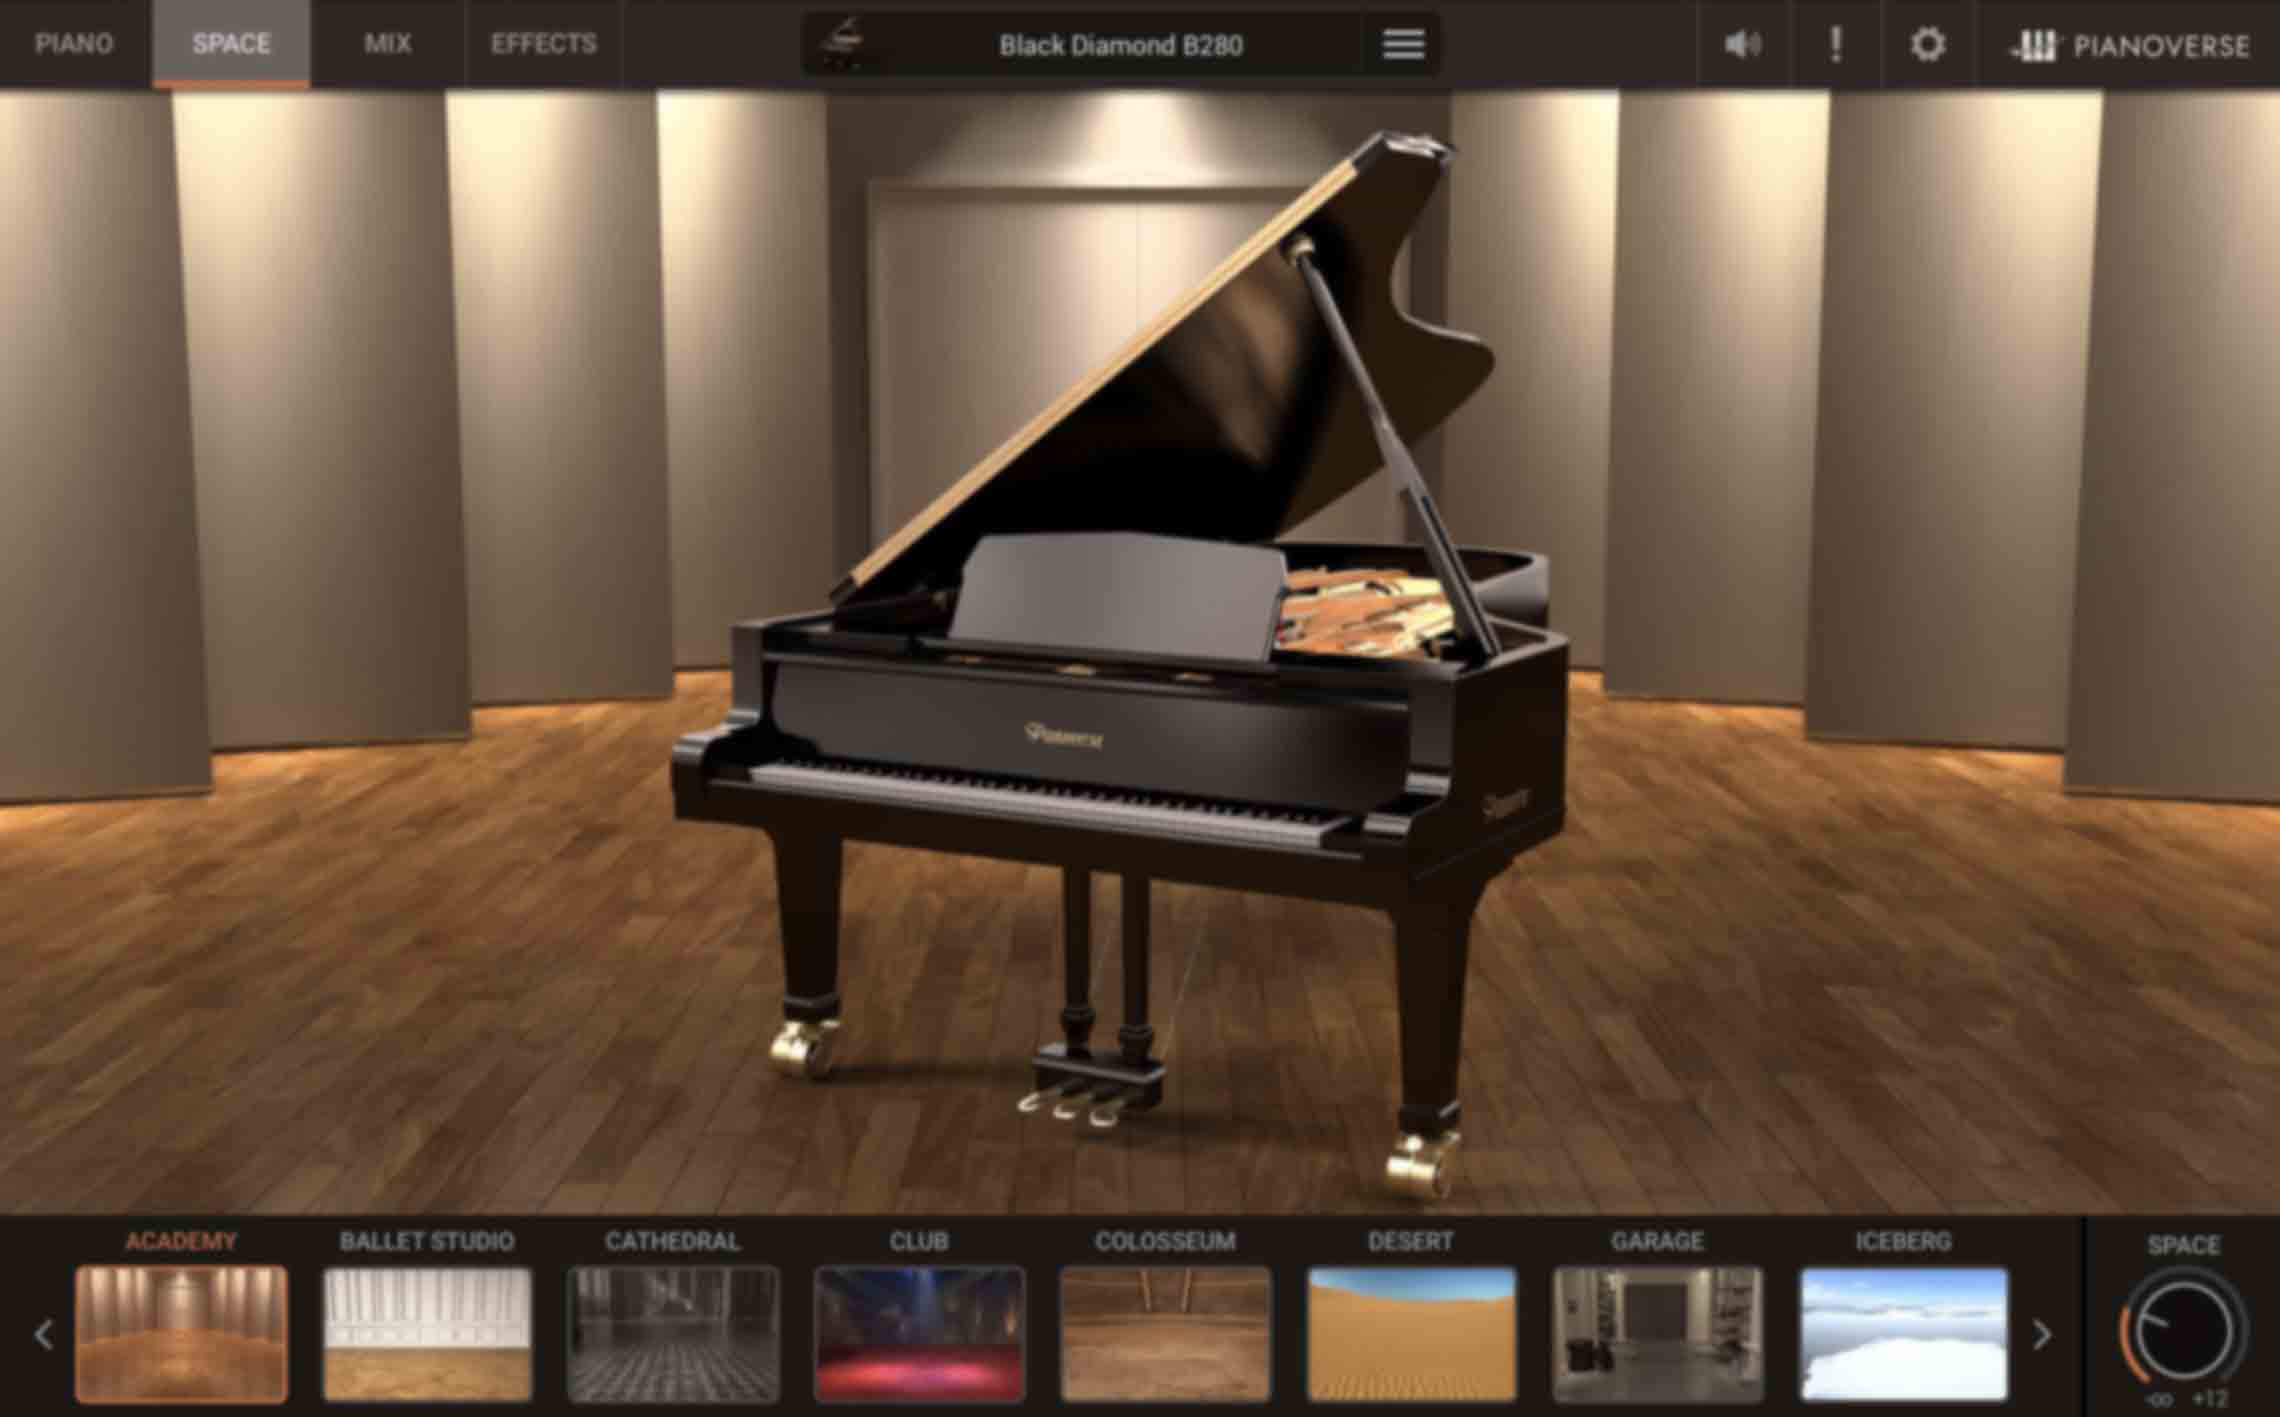 Academy - A large, well-tuned warm, wooden room with quick, controlled reflections is the ideal starting place for your piano.